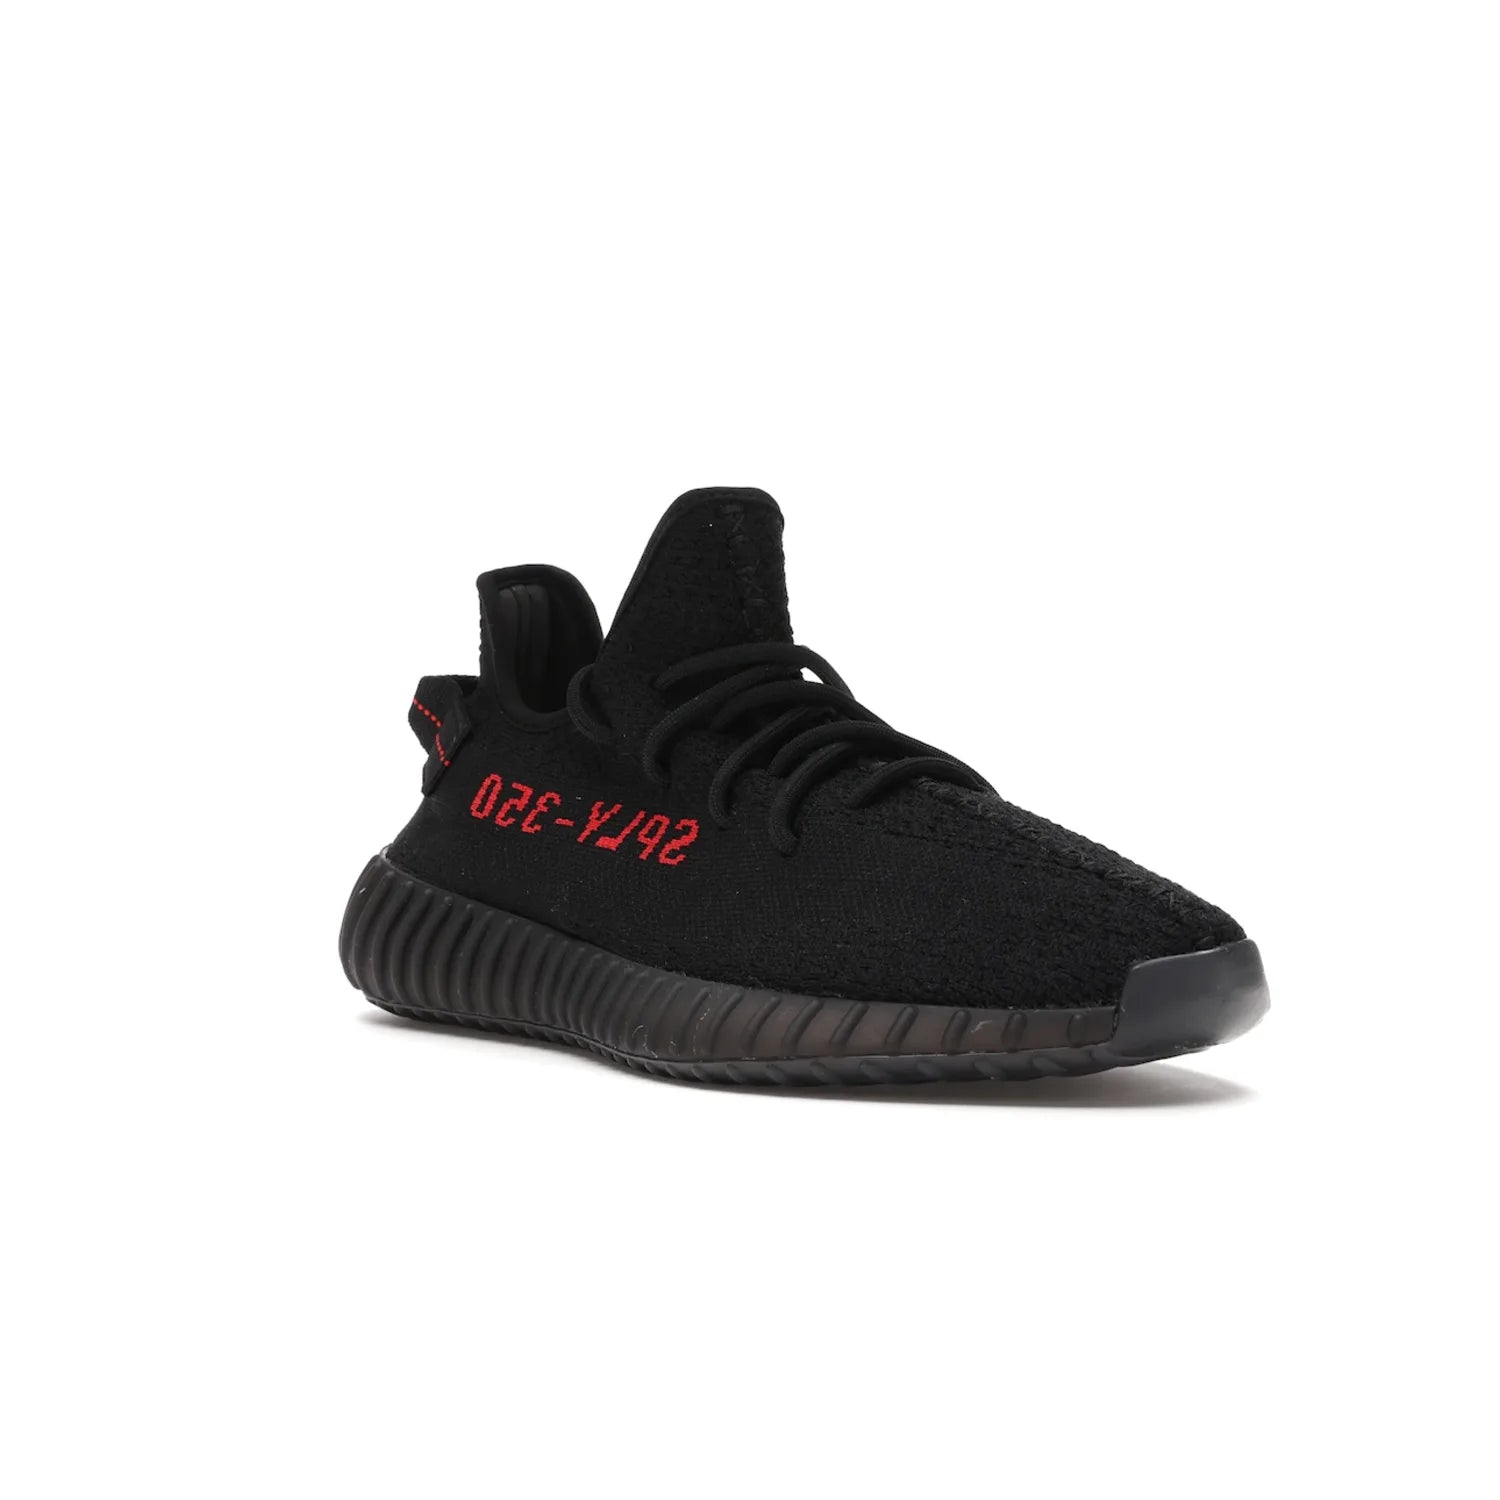 adidas Yeezy Boost 350 V2 Black Red (2017/2020) - Image 6 - Only at www.BallersClubKickz.com - Adidas Yeezy Boost 350 V2 Black Red: a classic colorway featuring black Primeknit upper, BOOST cushioning system, and iconic "SPLY-350" text. Released in 2017 for a retail price of $220.